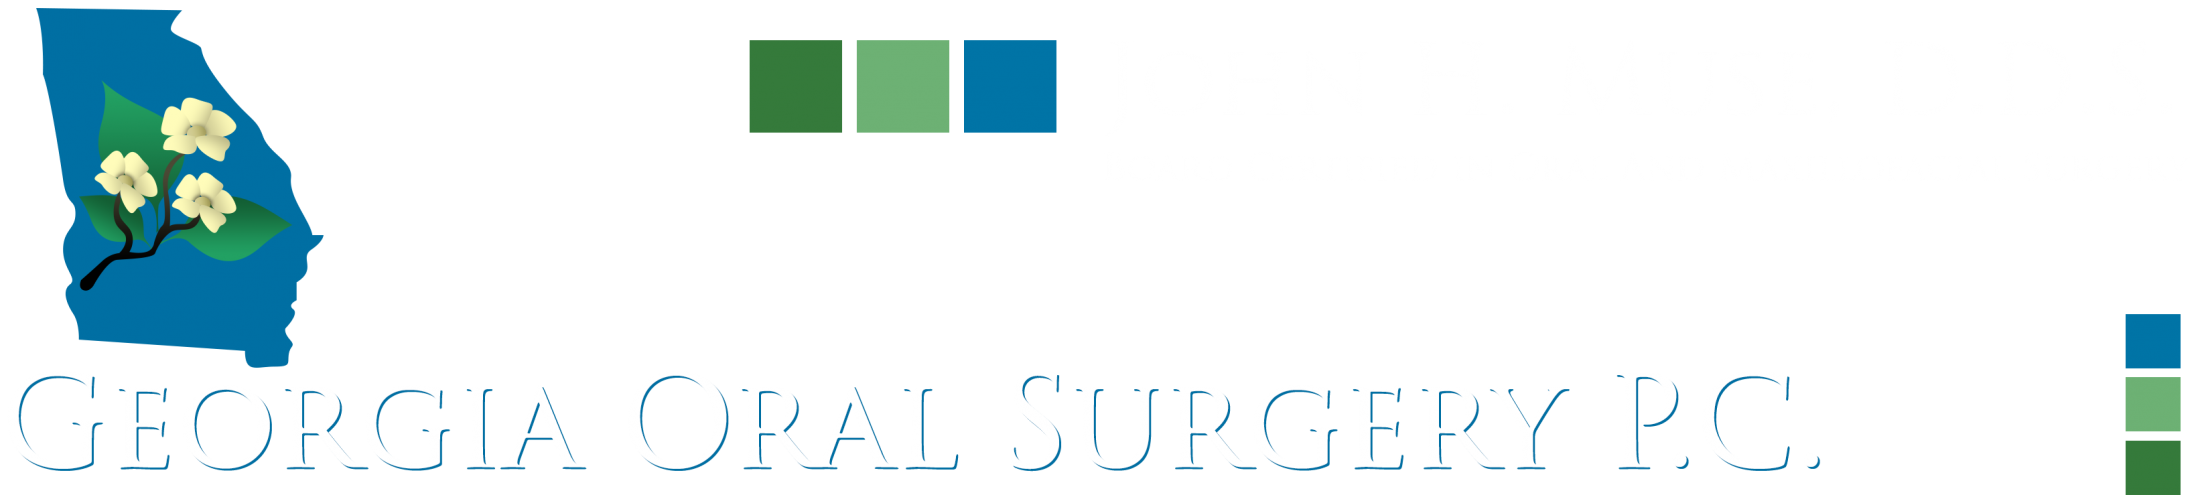 Link to Georgia Oral Surgery home page